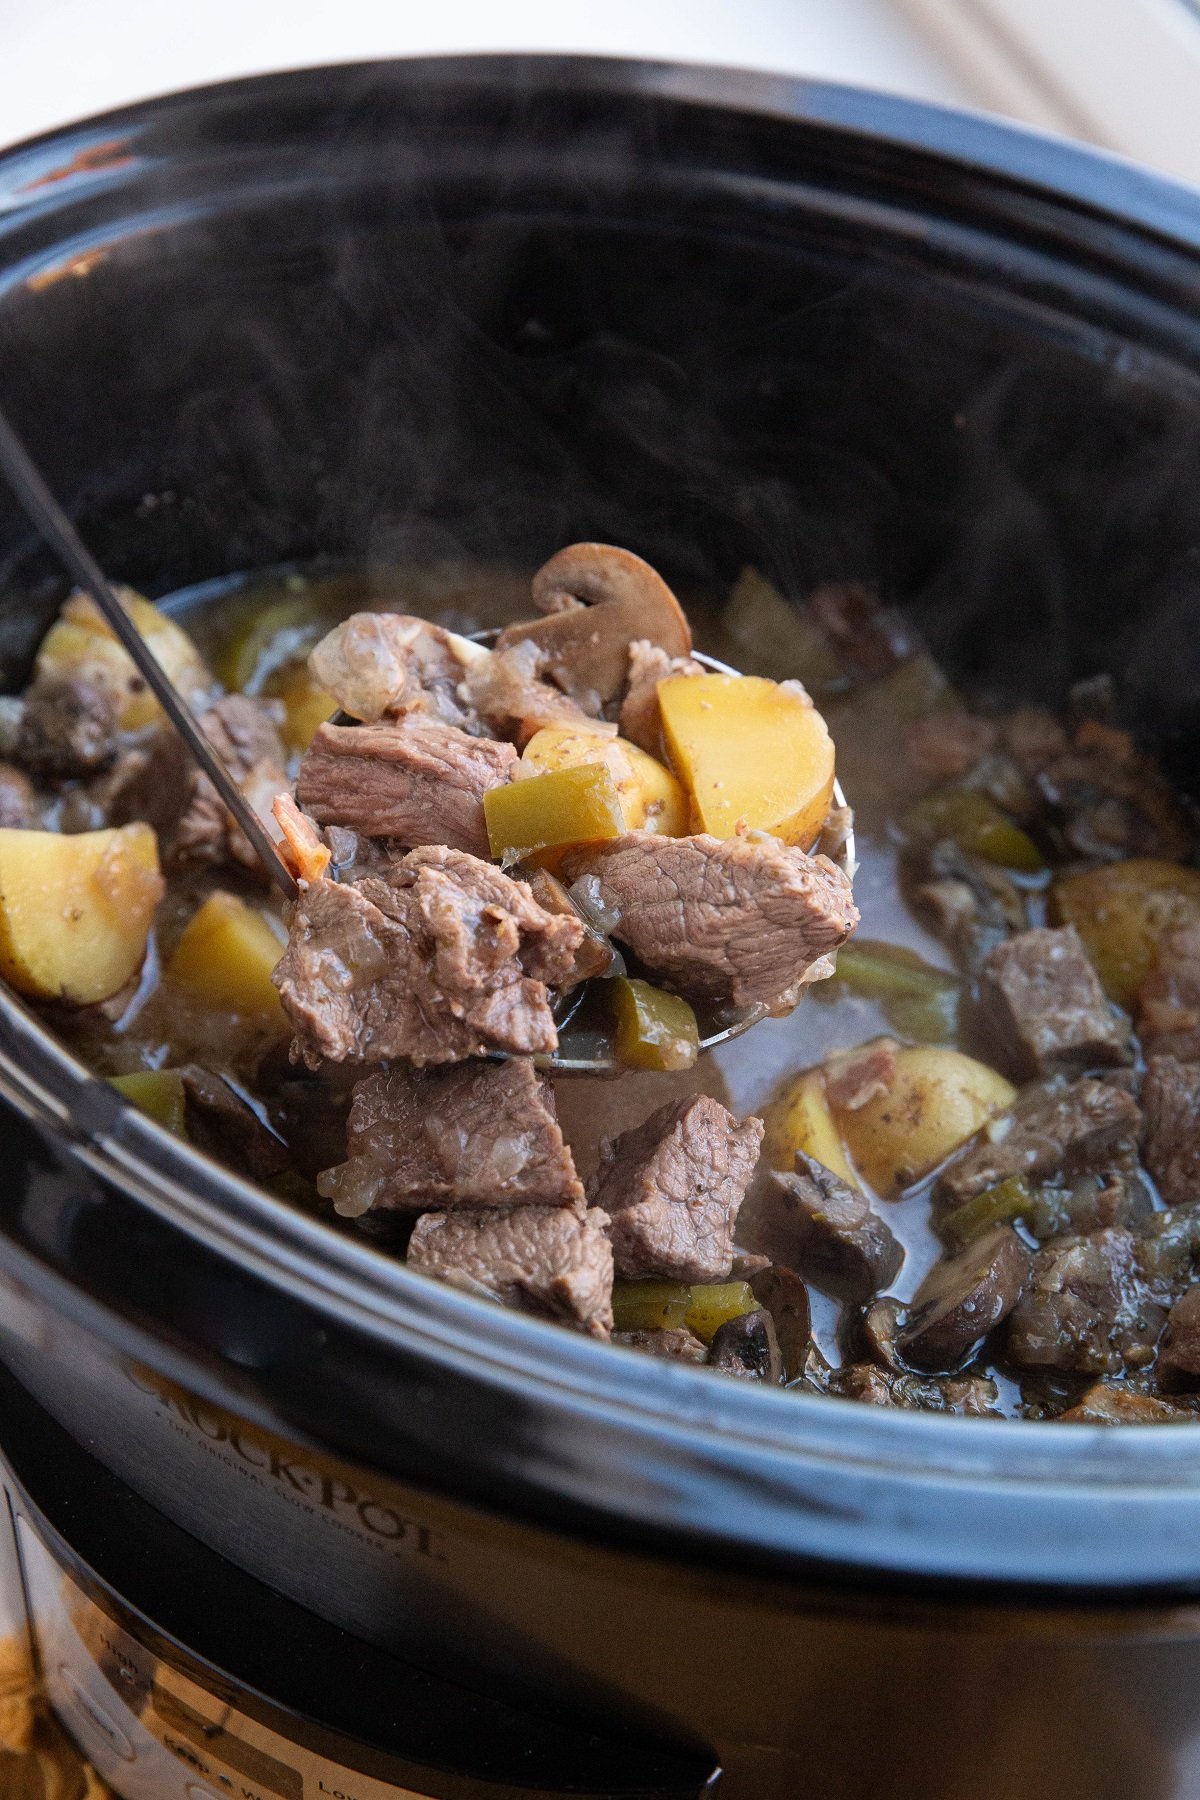 Crock pot full of steak and potato soup with a ladle scooping some of the soup out to serve.